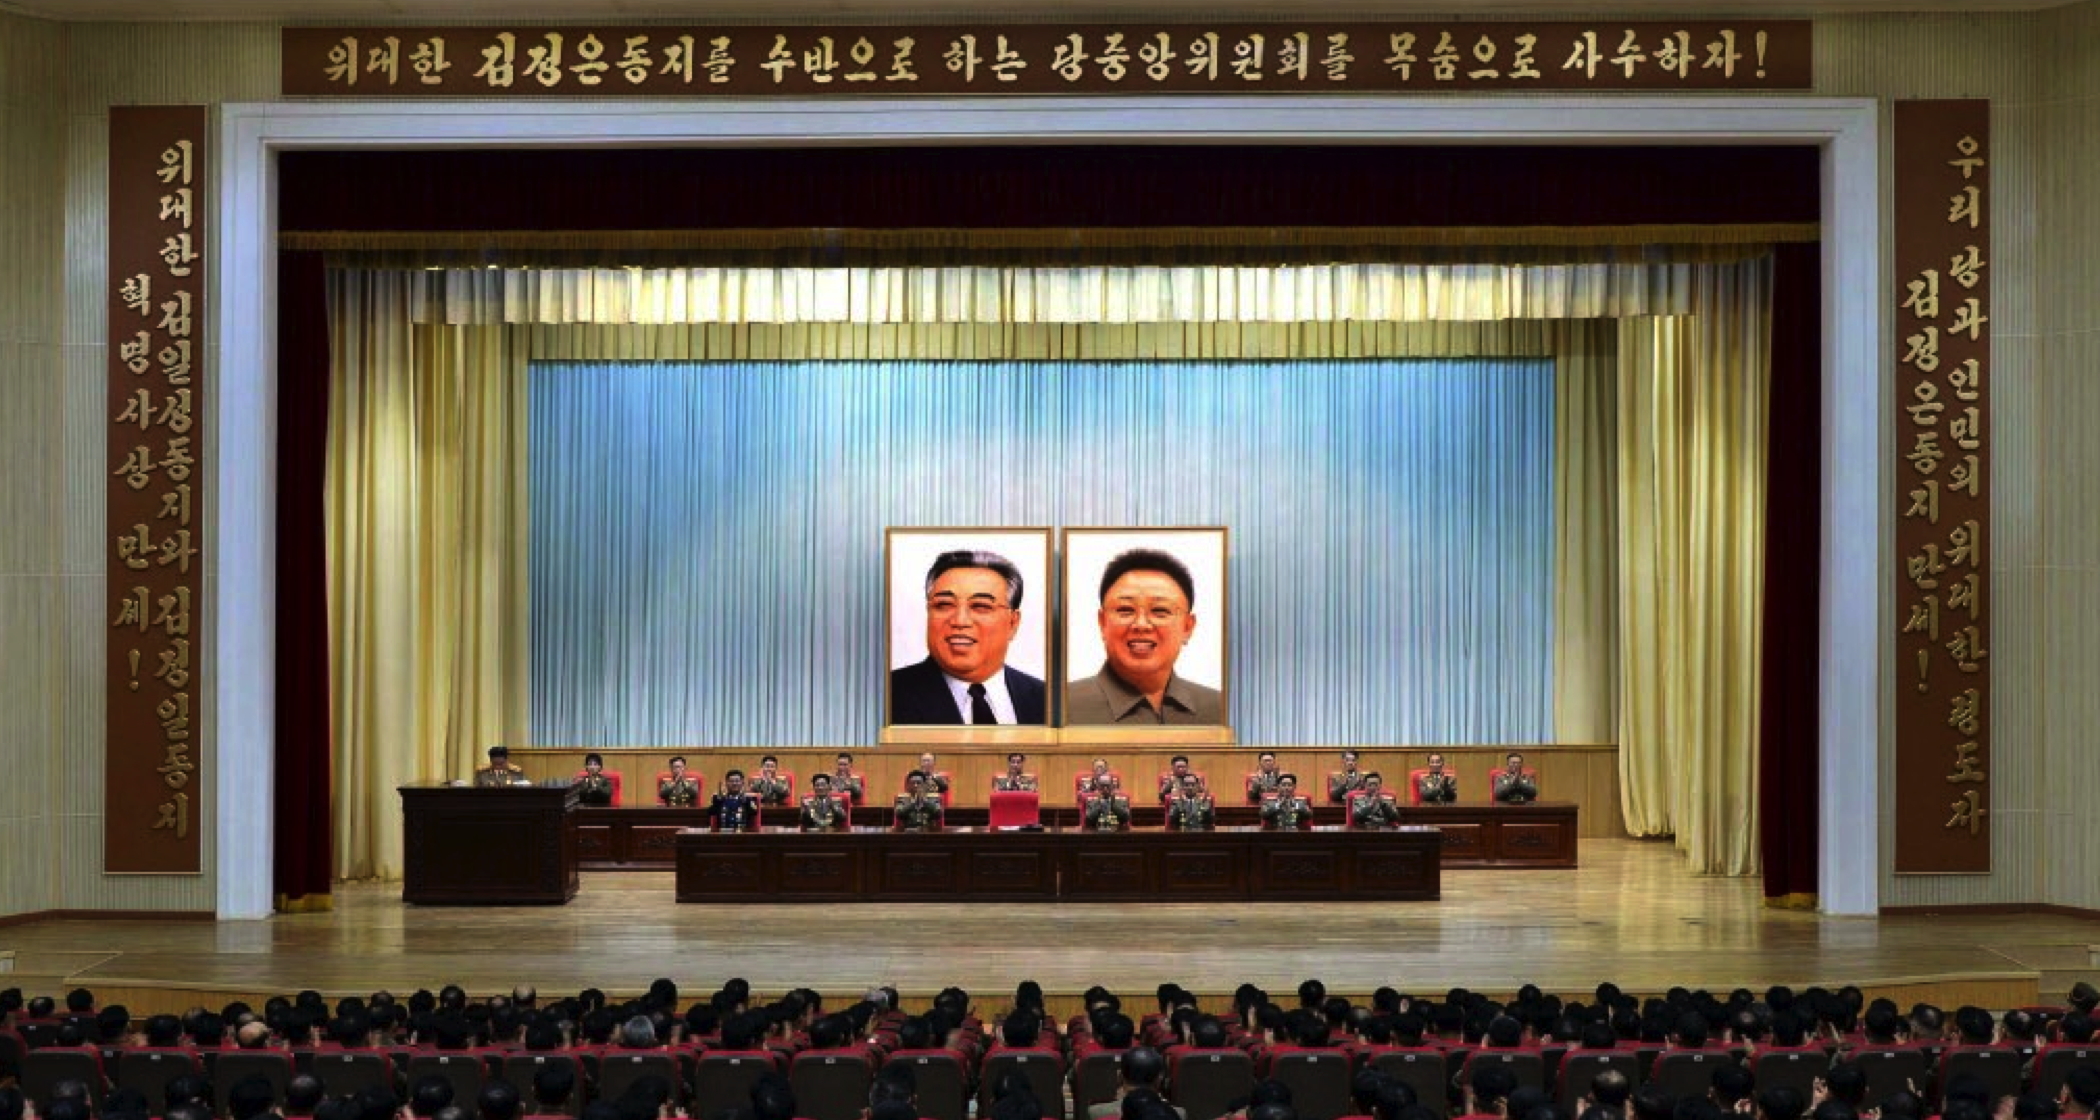 View of the platform at the MPAF of a February 7, 2017 meeting of senior KPA officials marking the historical anniversary of North Korea's armed forces. This photo appeared top center on the front page of the February 8, 2017 edition of the WPK daily newspaper Rodong Sinmun (Photo: Rodong Sinmun/KCNA).